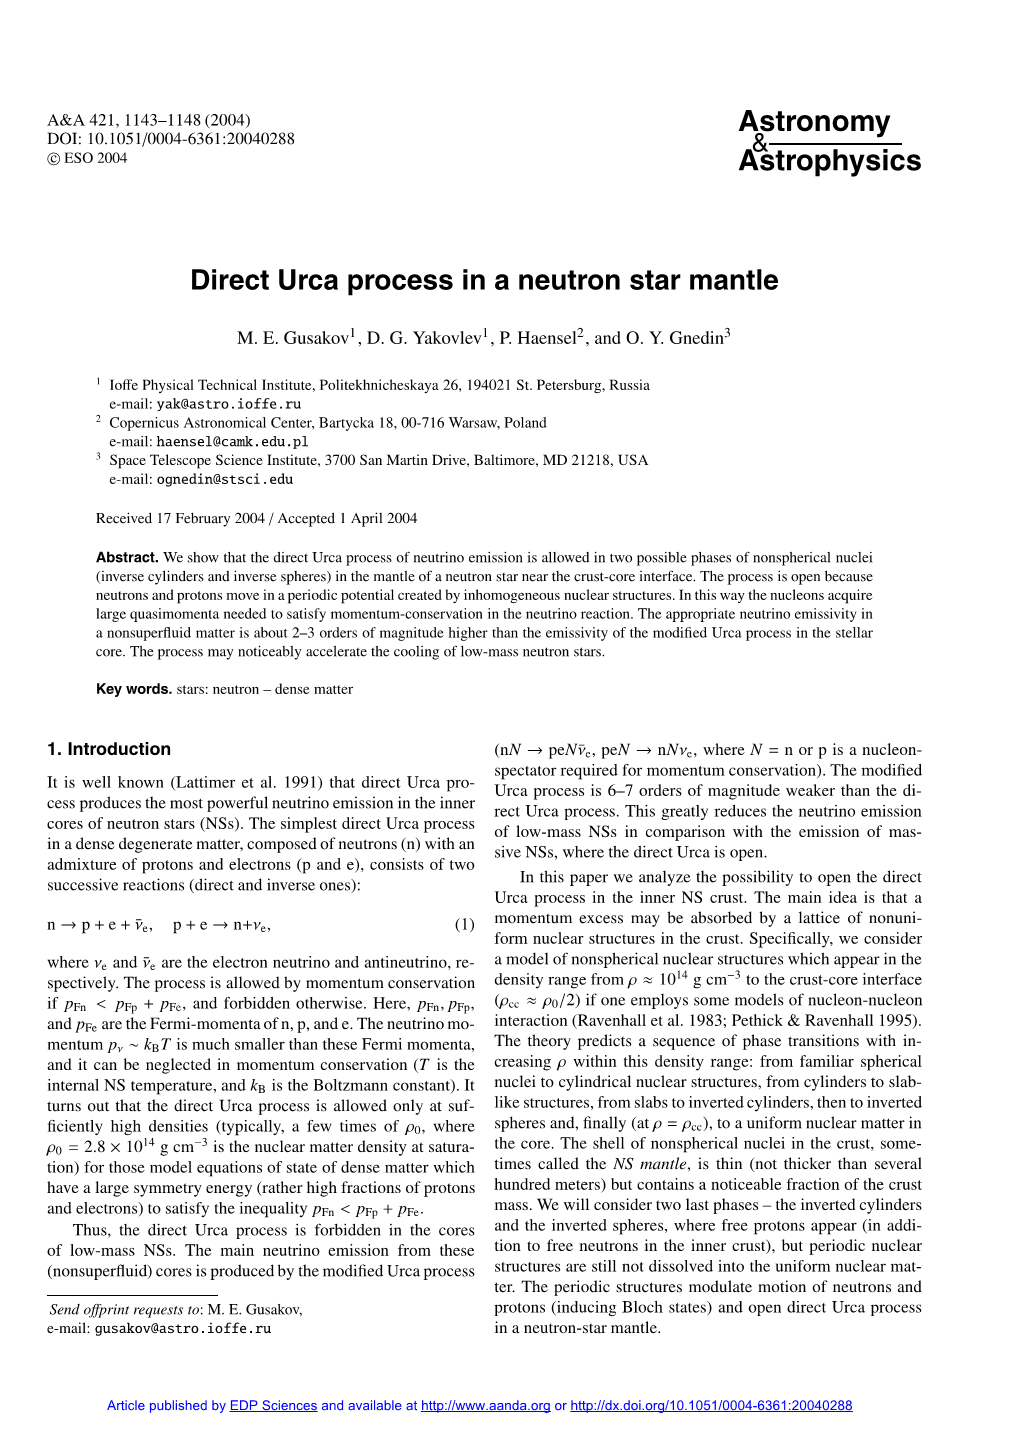 Direct Urca Process in a Neutron Star Mantle